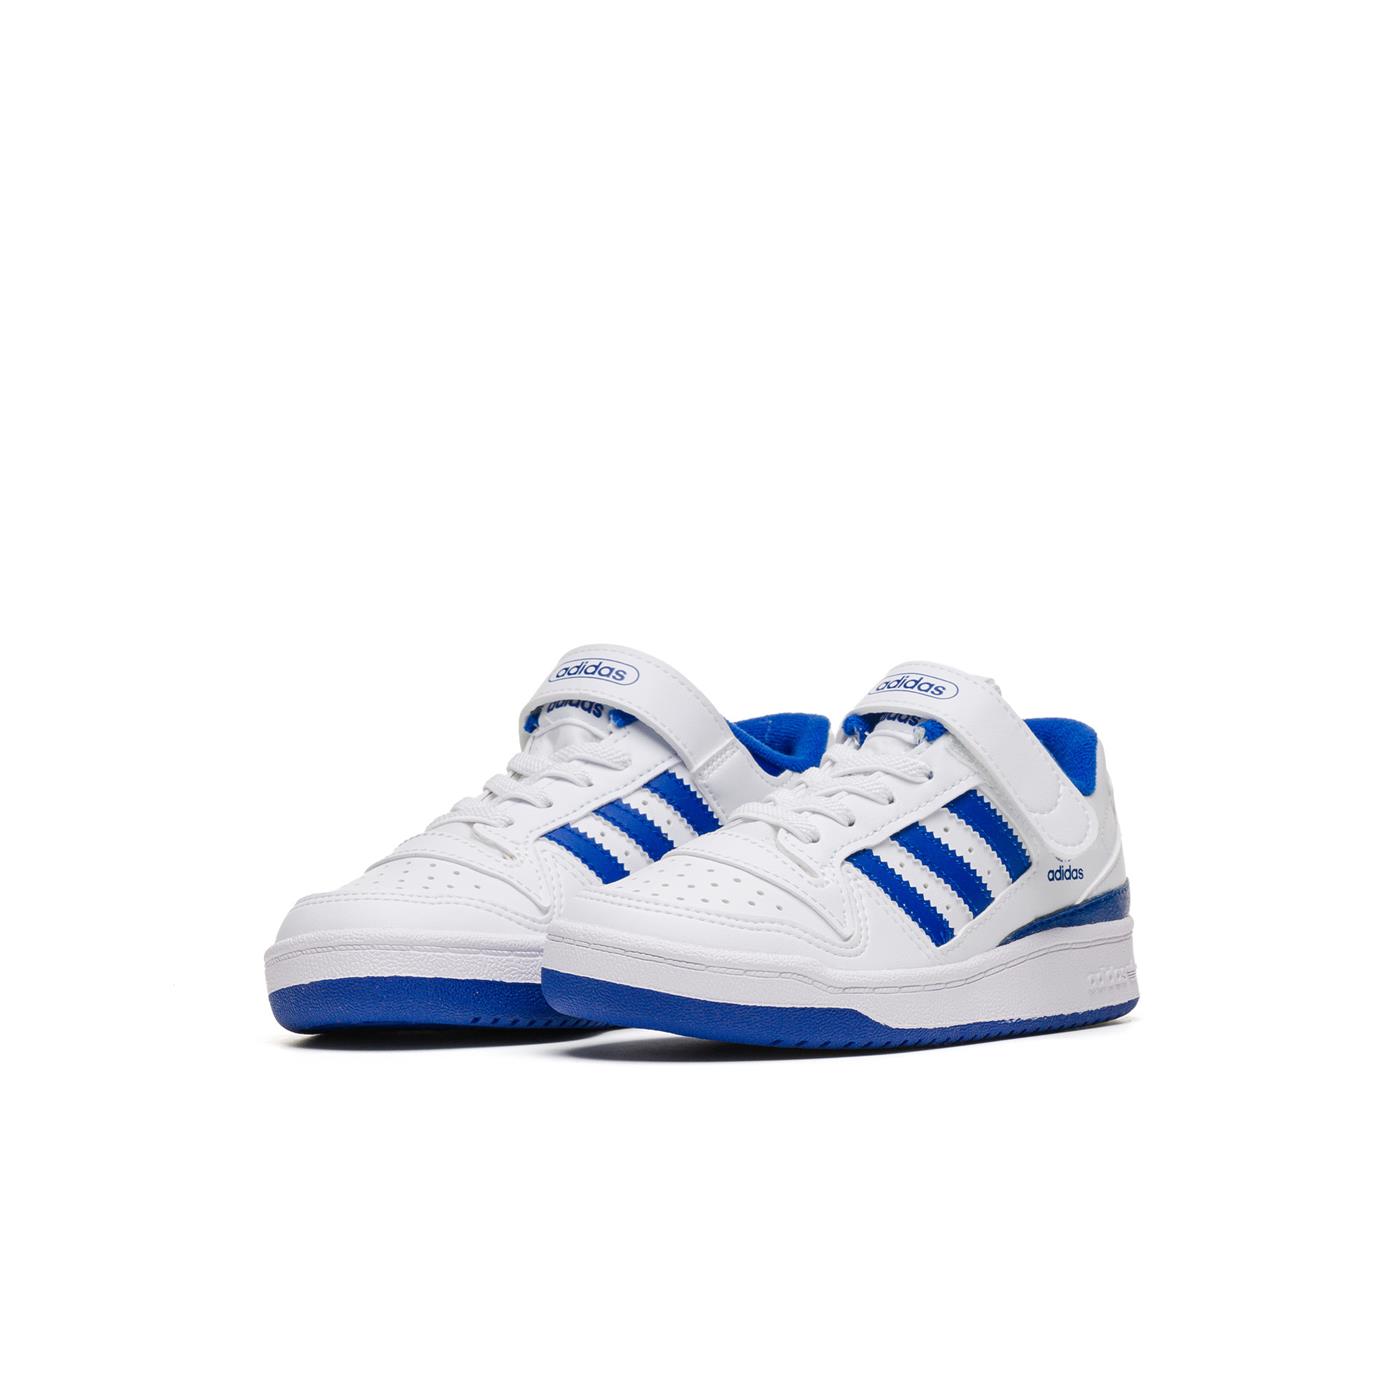 Sneakers adidas Originals Forum Low C White for Child | FY7978 | XTREME.PT